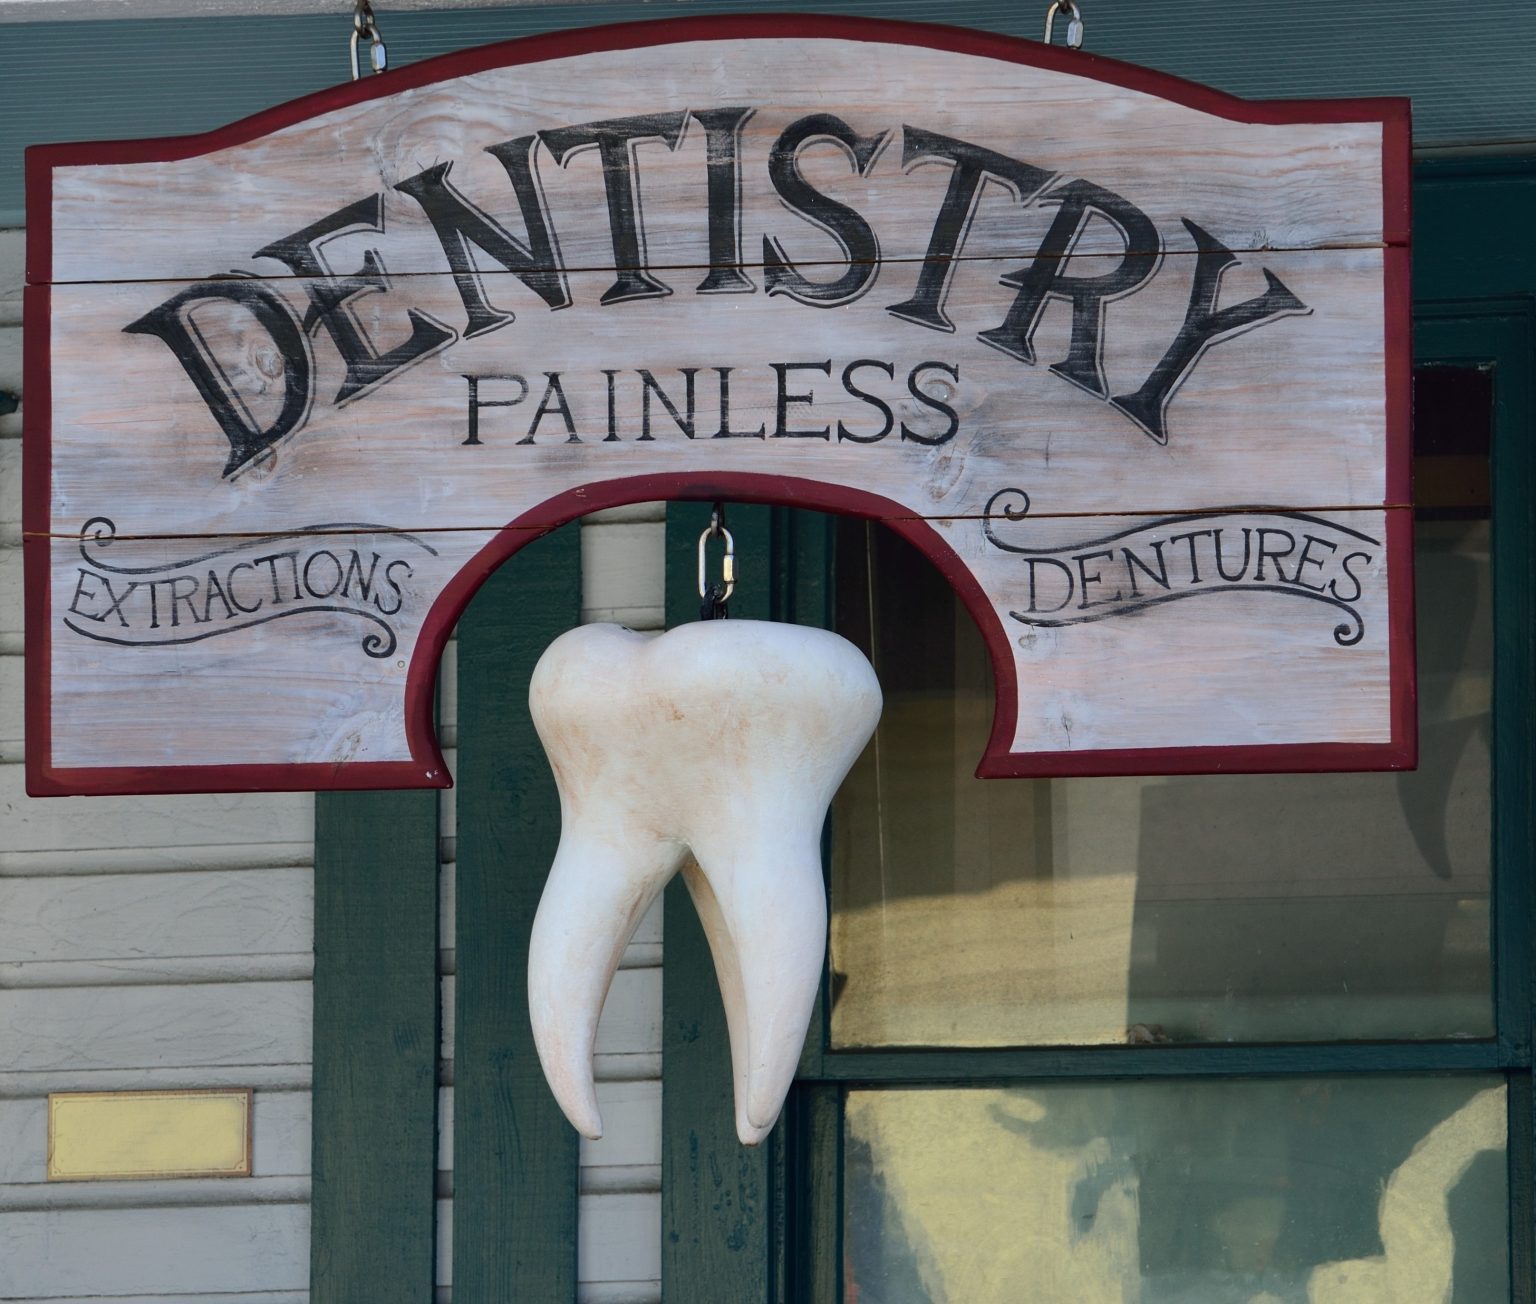 Finding The Right Dentist In Simpsonville SC | The Health's Galaxy